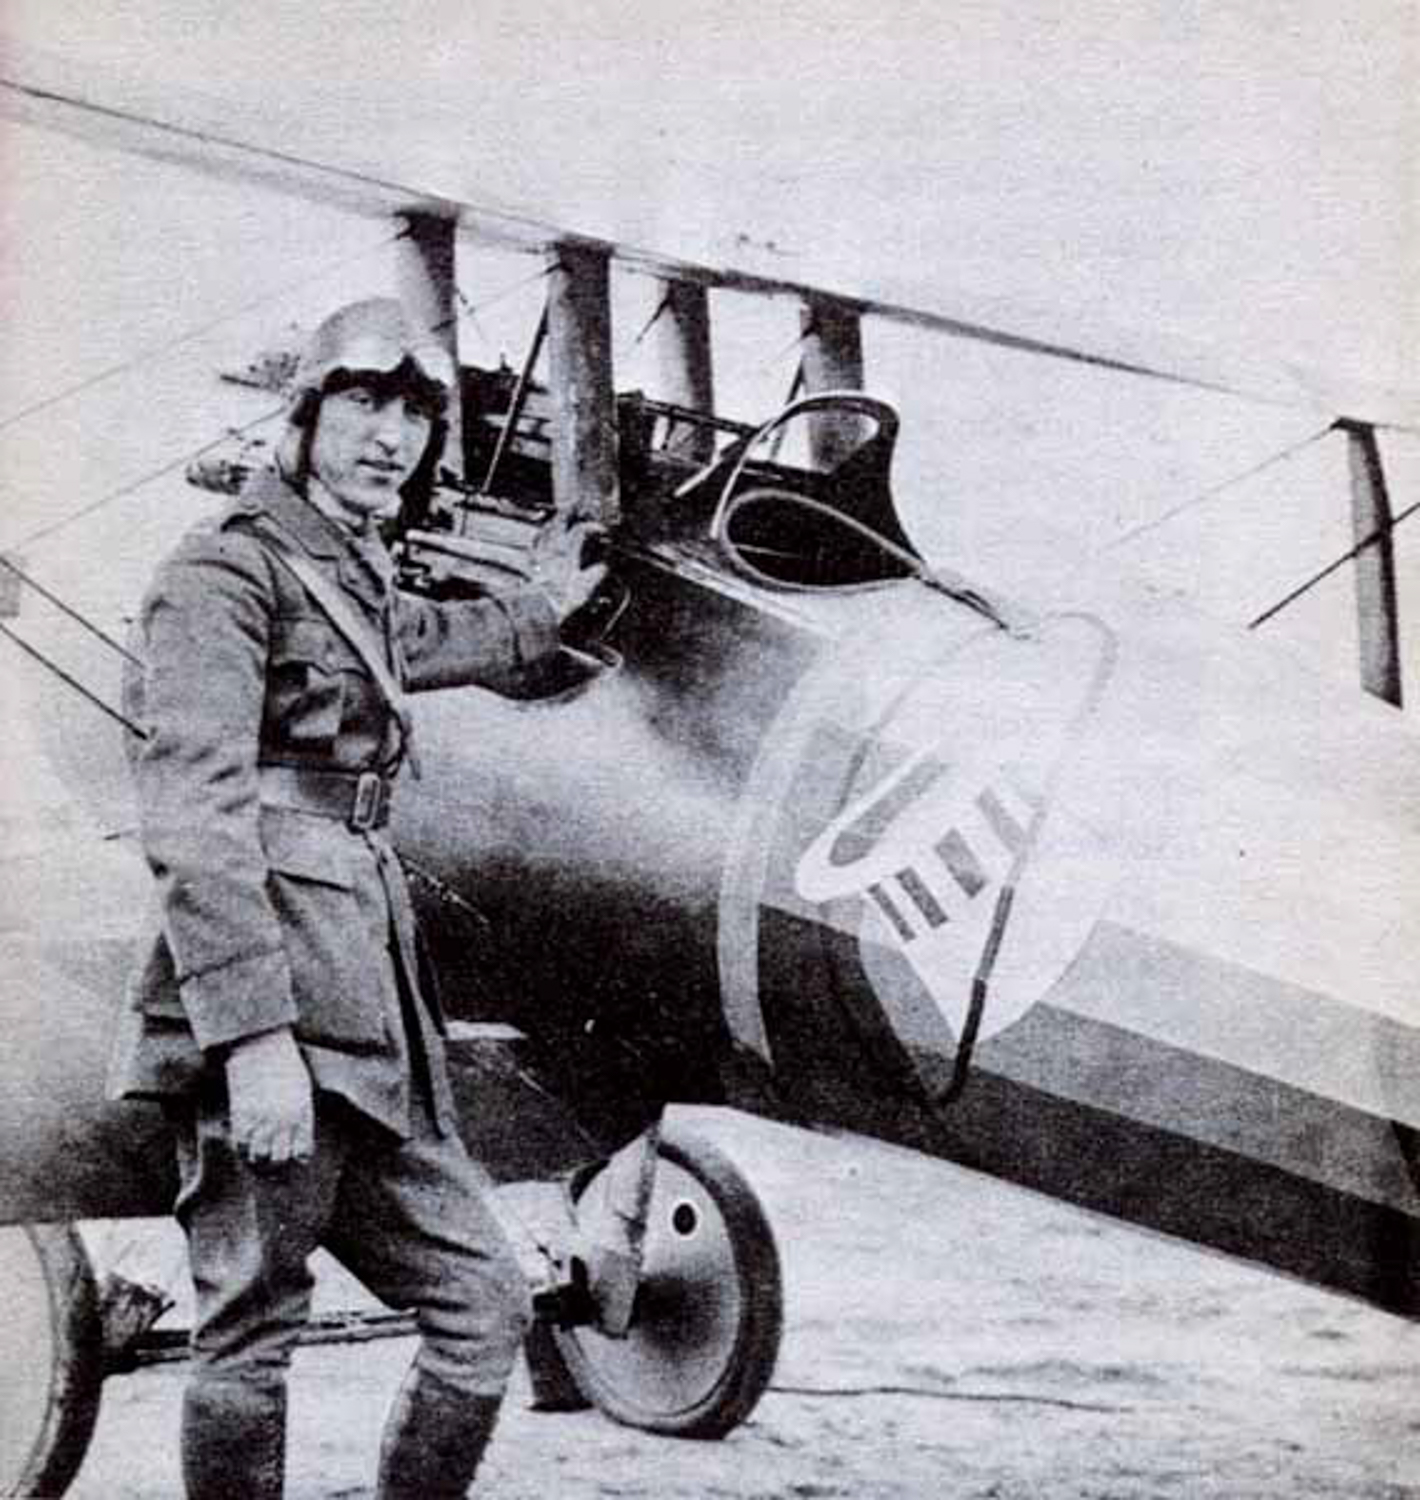 LT Rickenbacker first flew Nieuports, a plane French pilots avoided. 